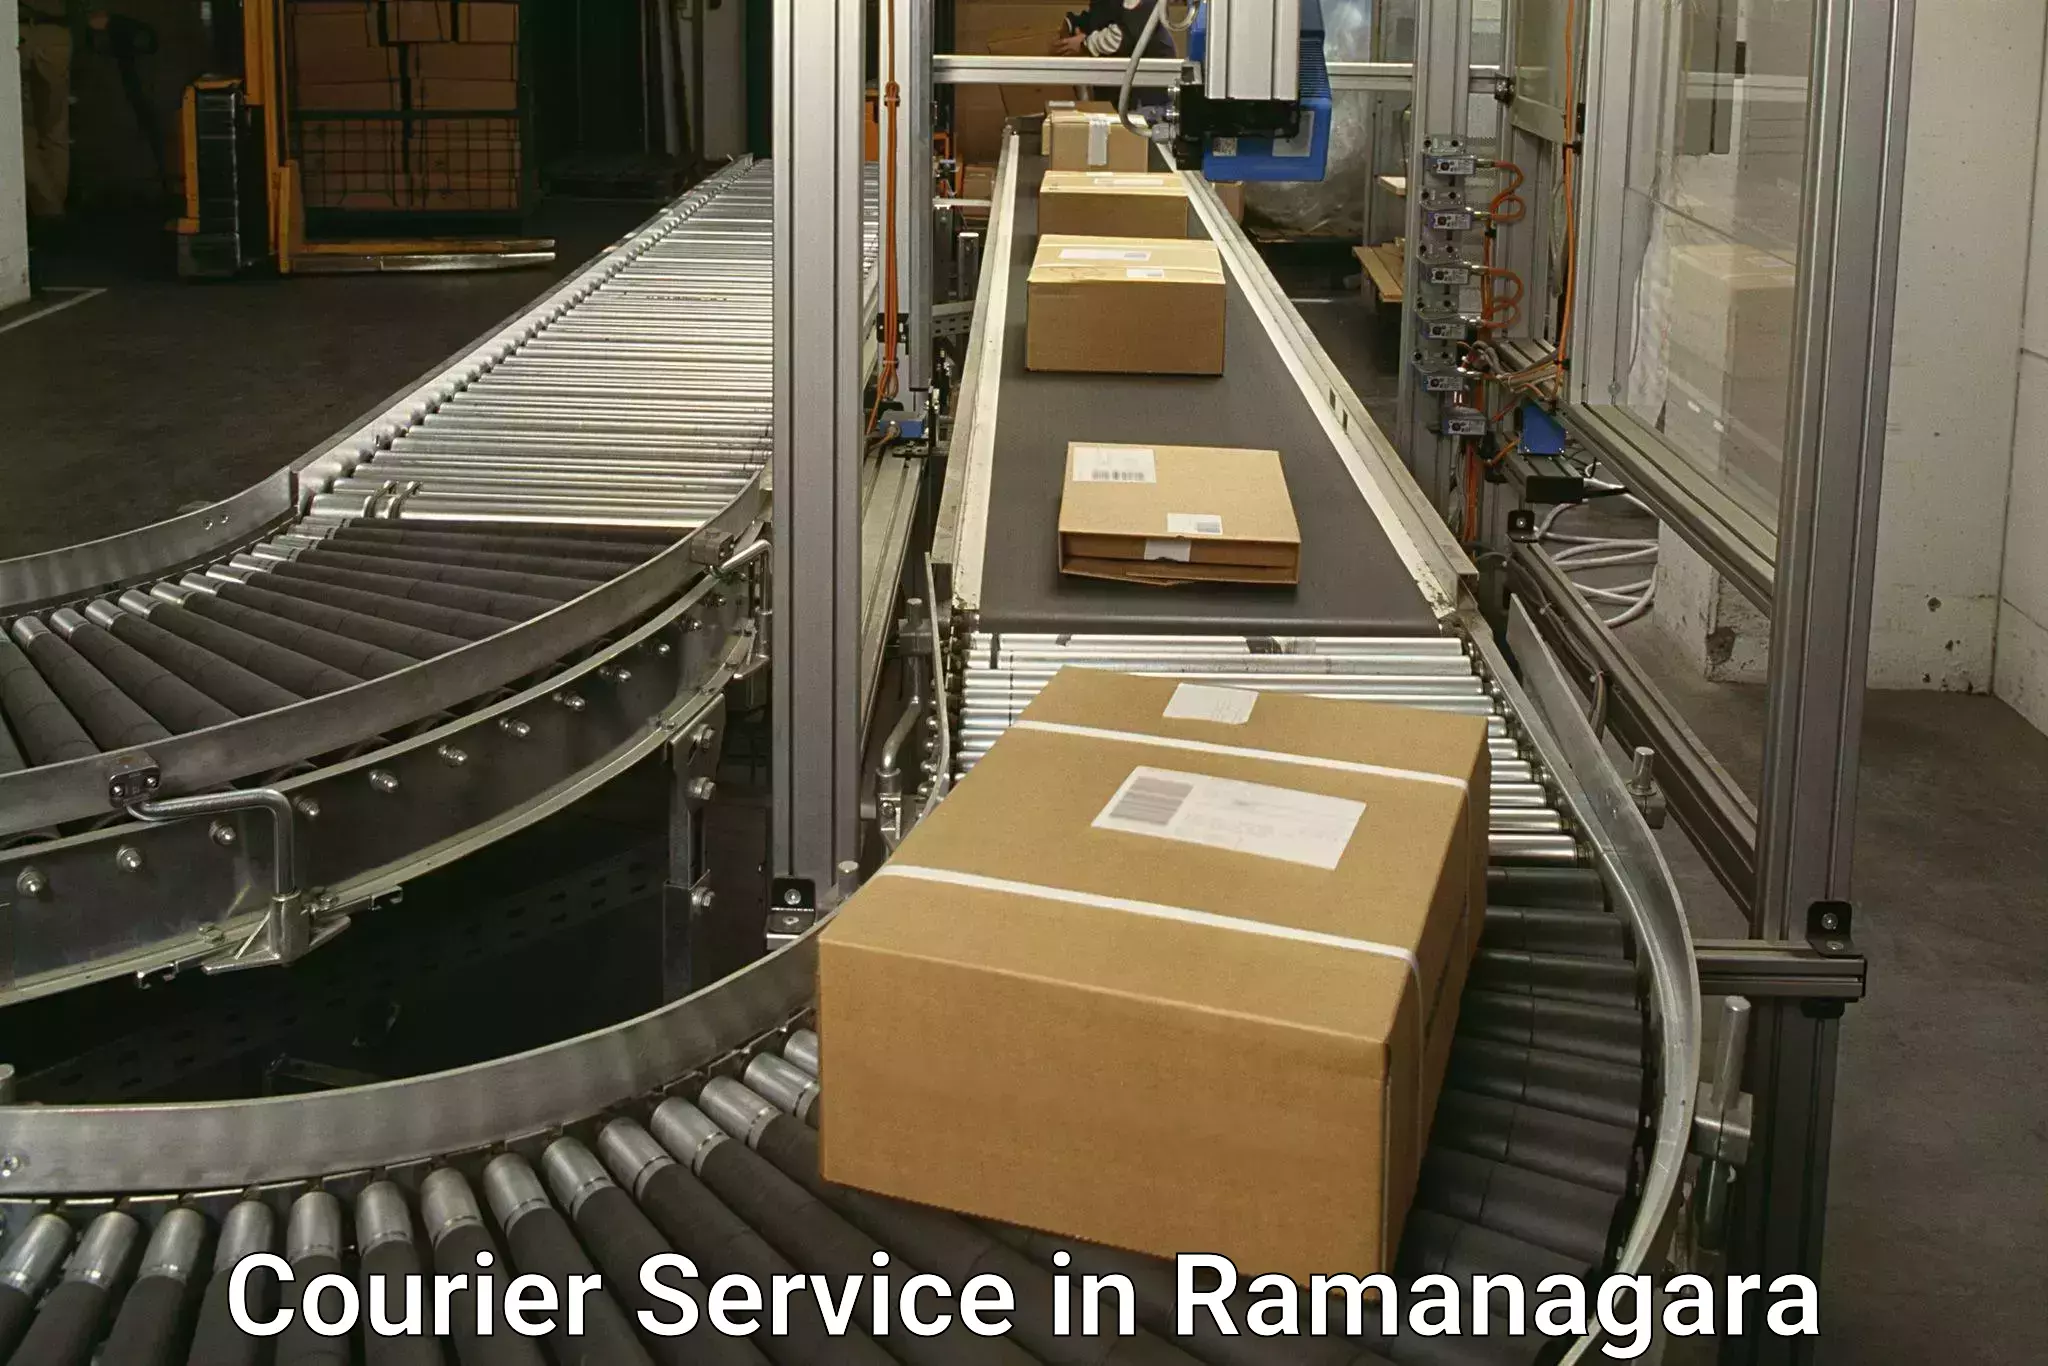 Postal and courier services in Ramanagara